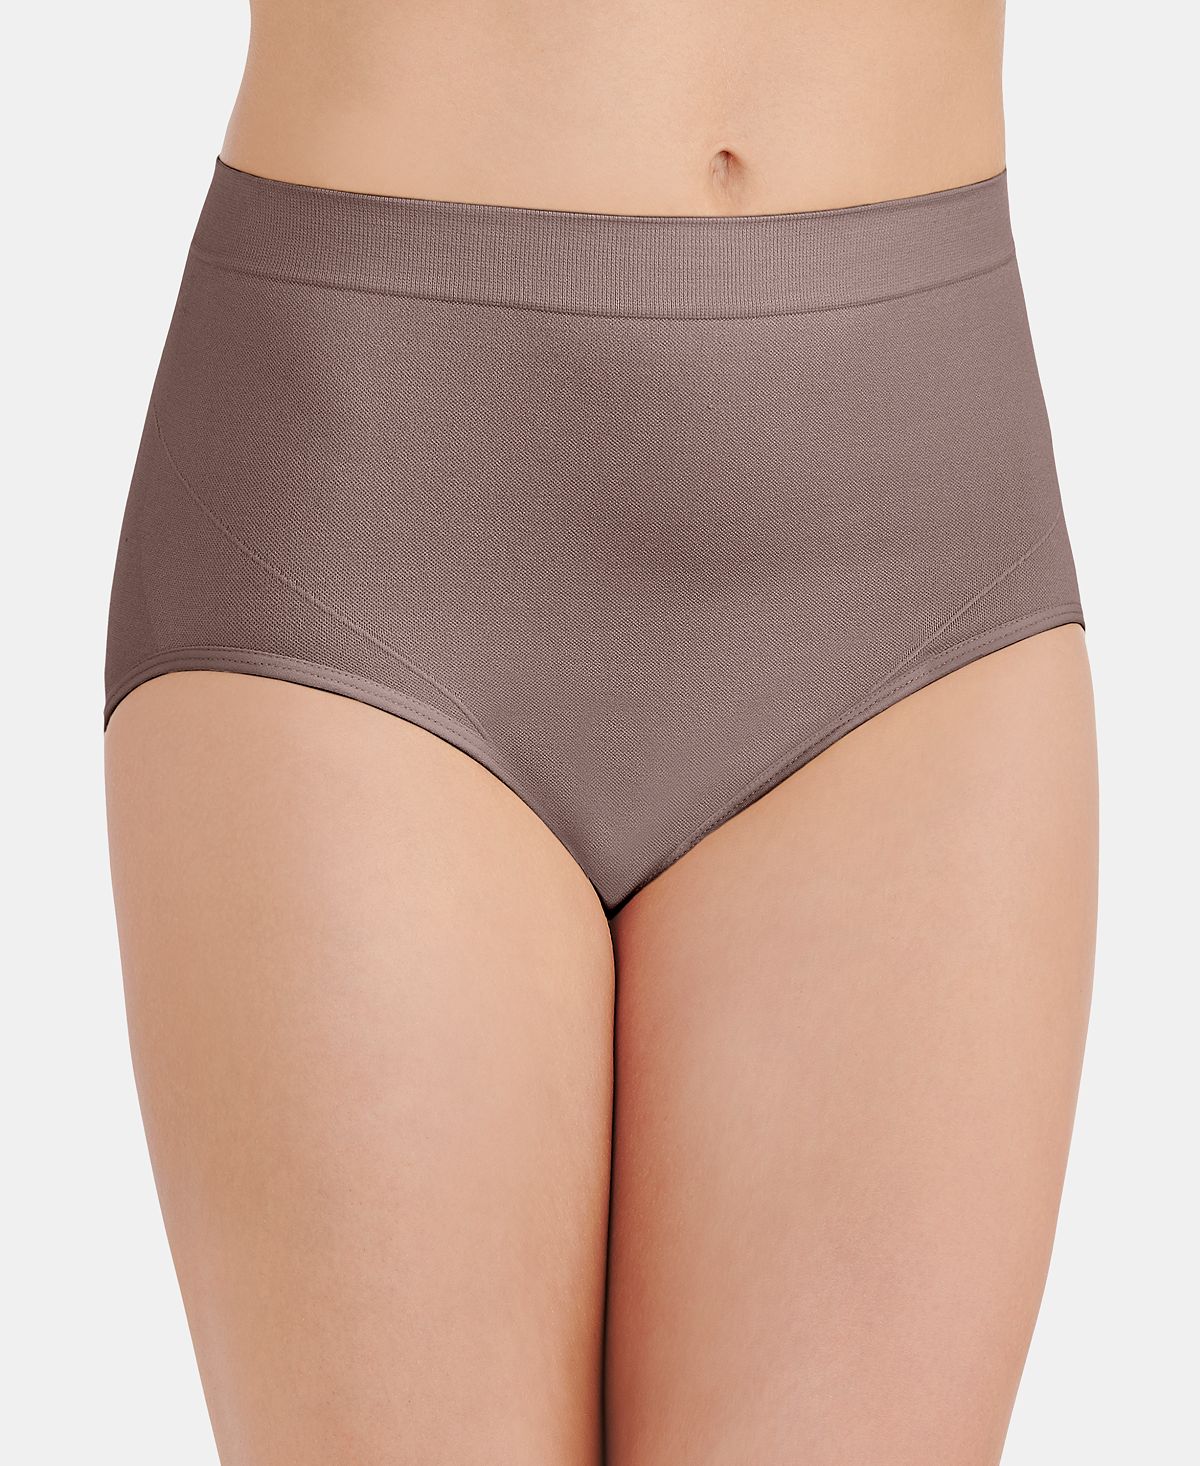 Vanity Fair Seamless Smoothing Comfort Brief Underwear 13264 Also Available In Extended Sizes Walnut- Nude 03